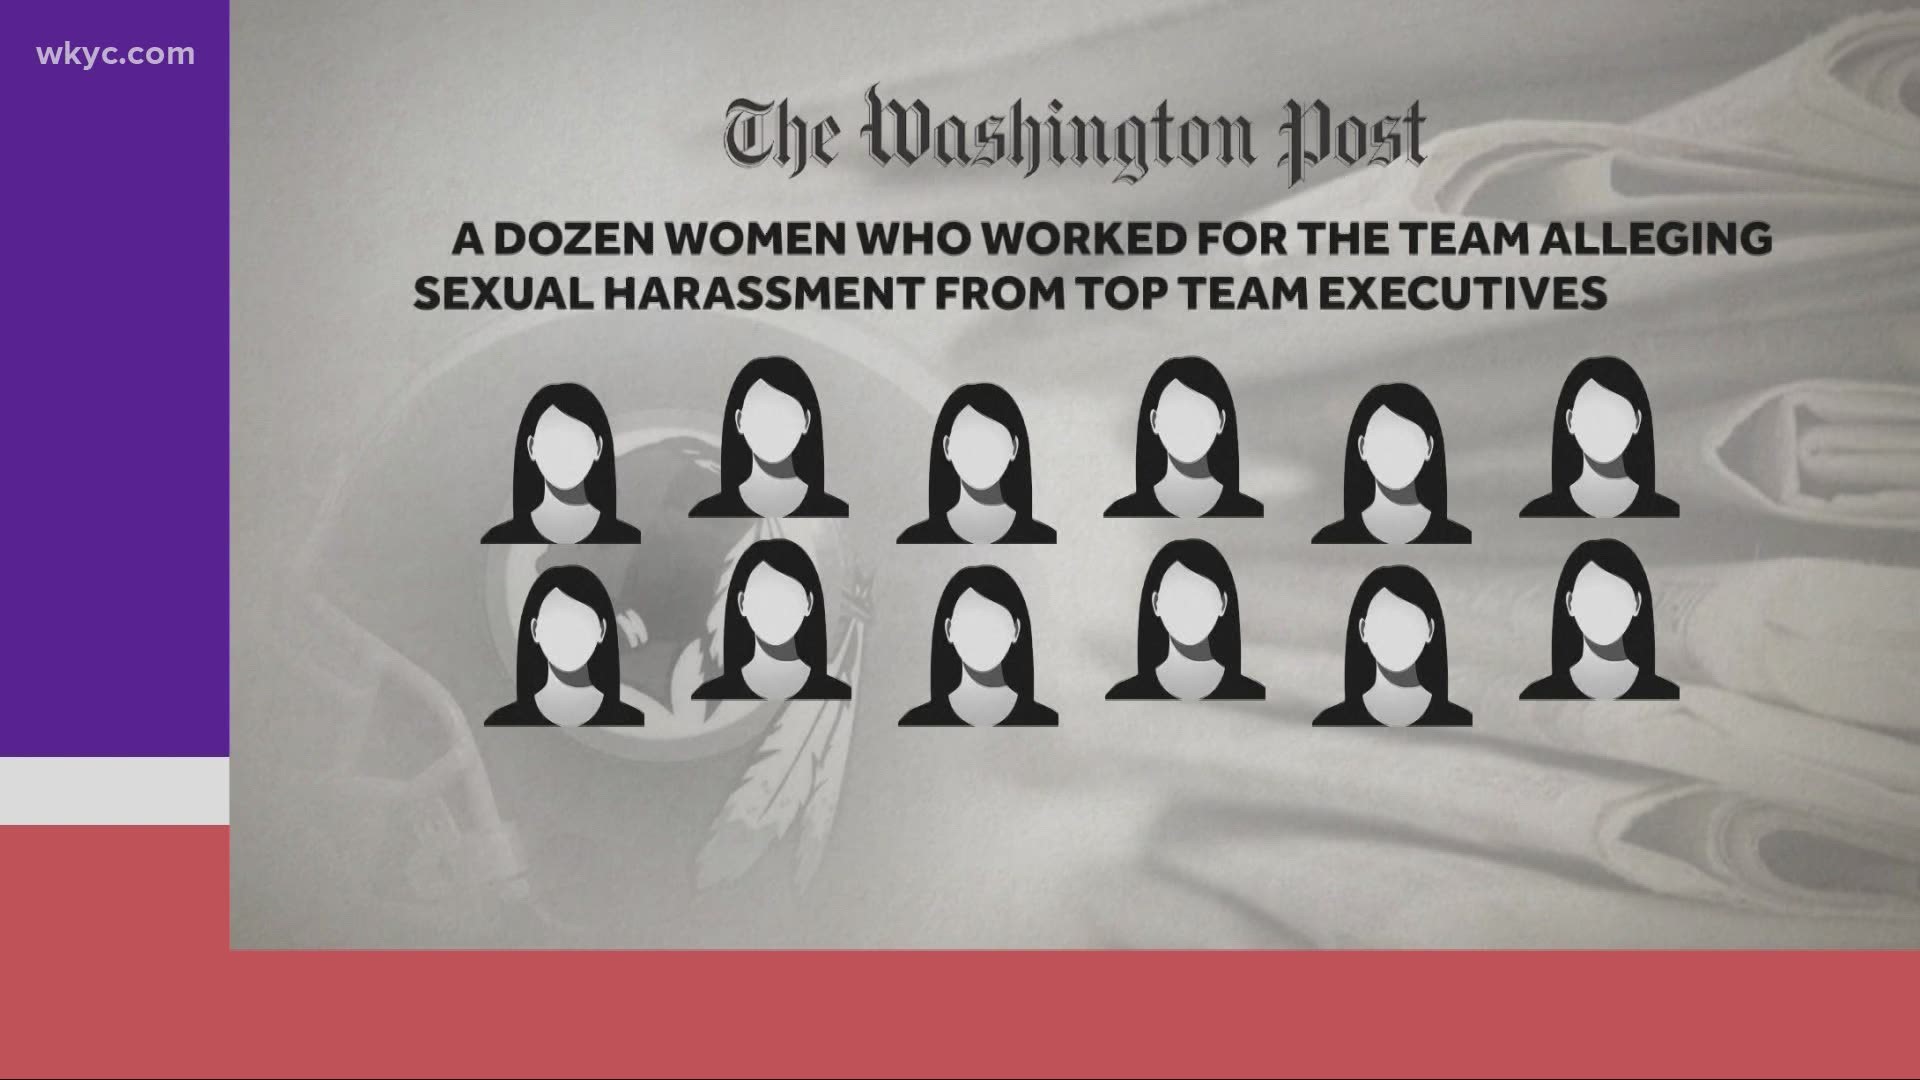 More than a dozen women have come forward claiming sexual abuse against top executives with the Redskins.  Three of the men accused have already left the team.